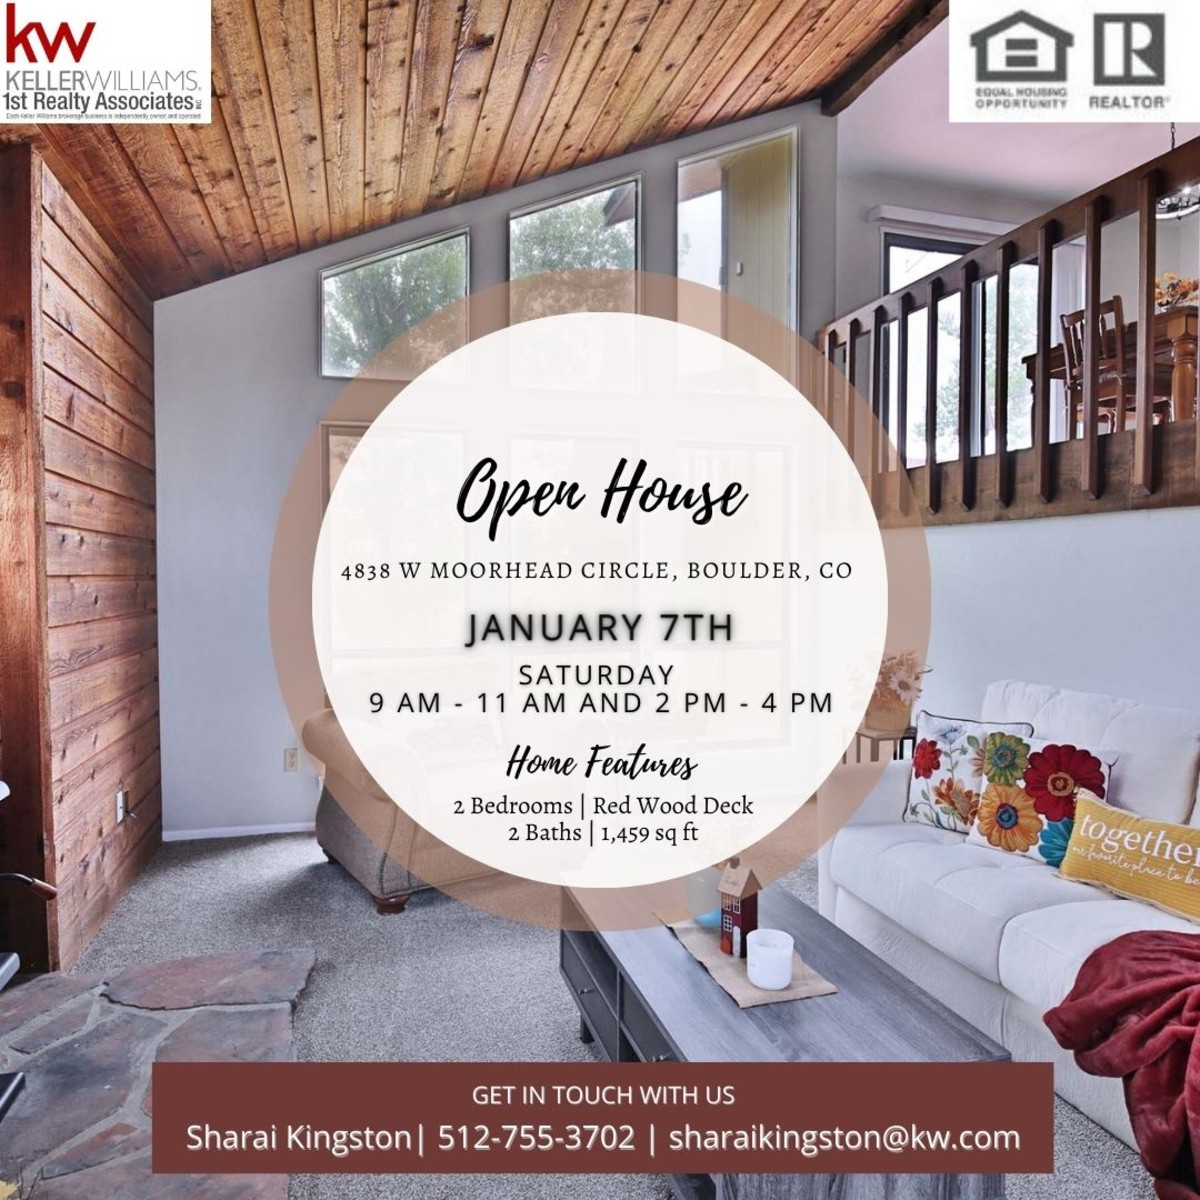 OPEN HOUSE:  Come see us on Saturday, January 7th at 4838 W Moorhead Circle, Boulder, CO.  
   
                 9AM - 11AM or 2 PM - 4 PM   

#warmthandcharacter #potbellystove #hikingandbiking #tubing #centrallylocated #CUBoulder #starterhome #collegestudent #downsize